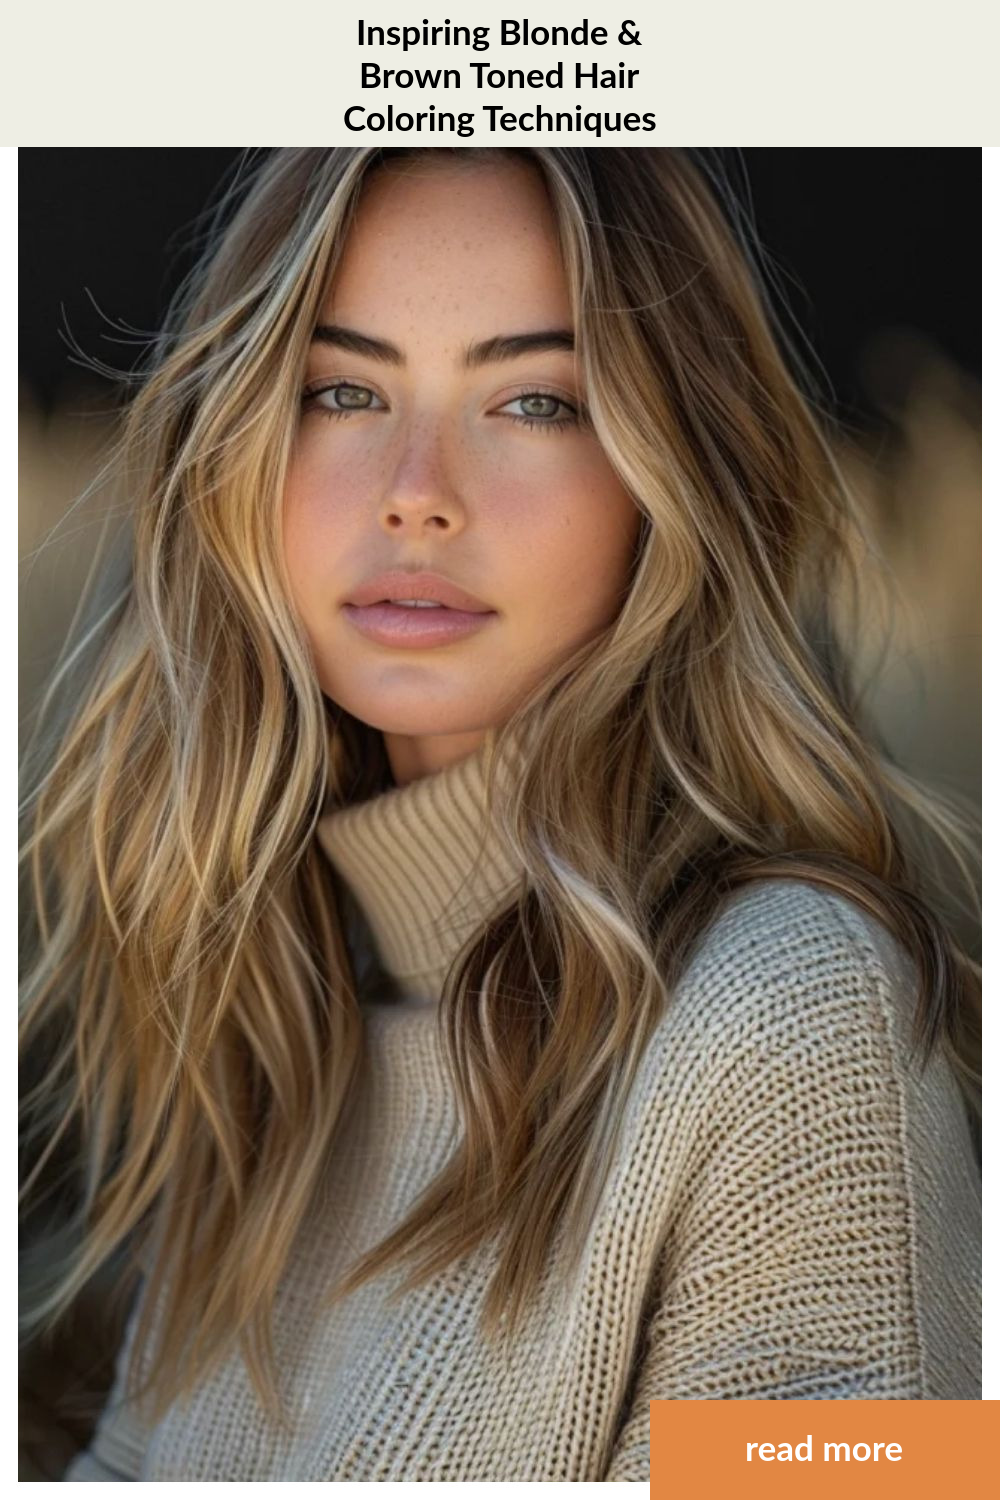 Inspiring Blonde & Brown Toned Hair Coloring Techniques 